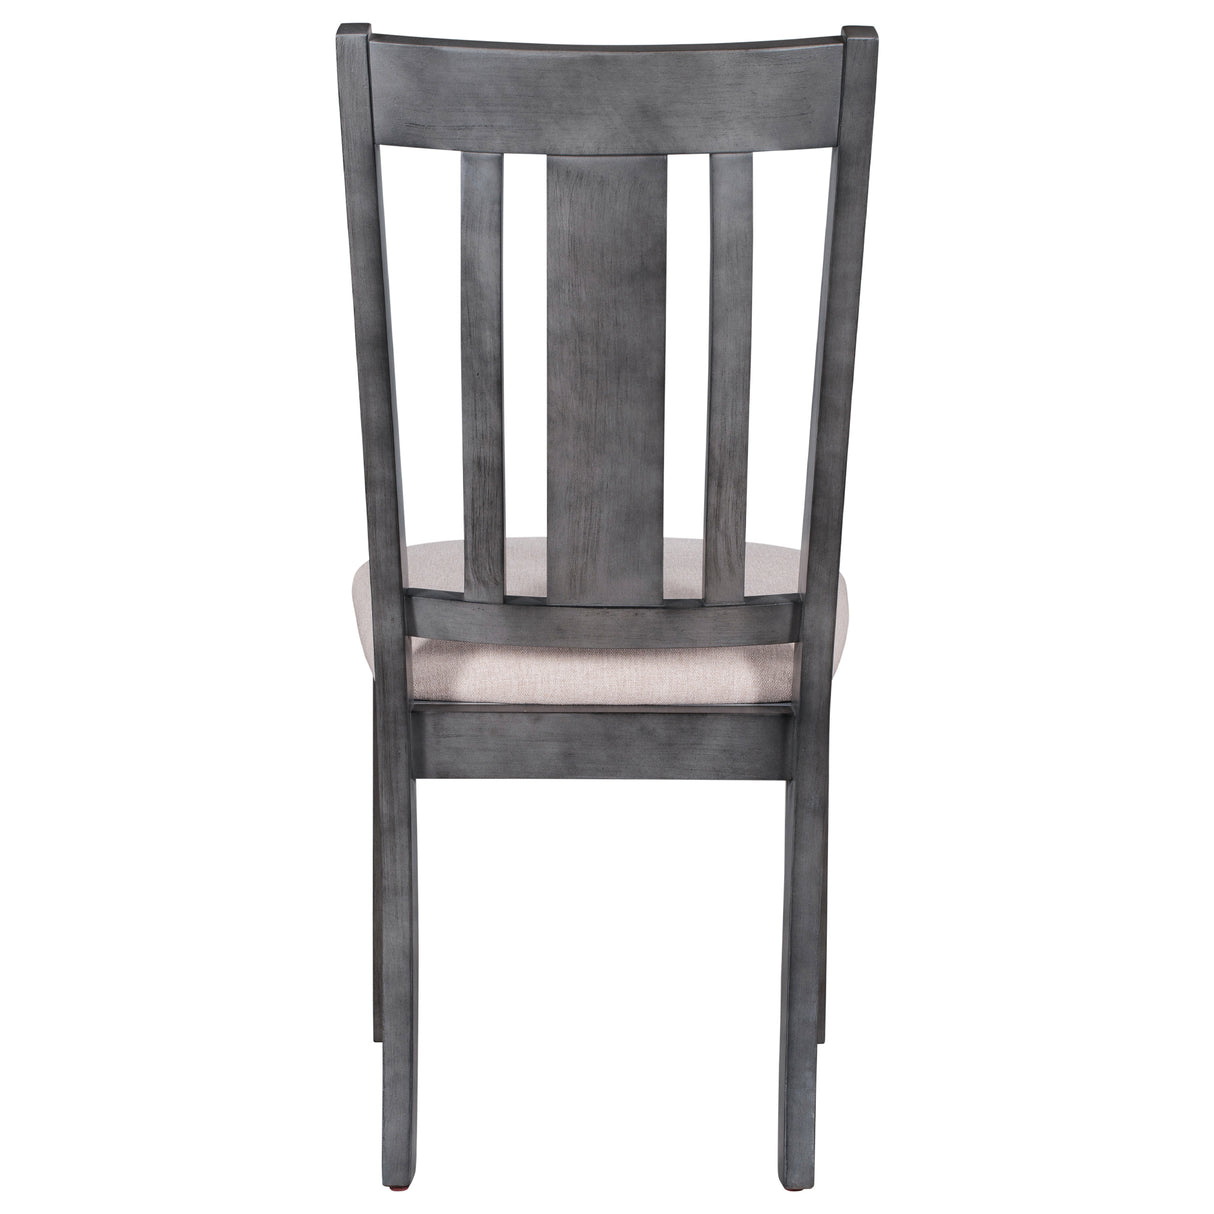 TREXM Industrial Style Wooden Dining Chairs with Ergonomic Design, Set of 4 (Gray) - Home Elegance USA